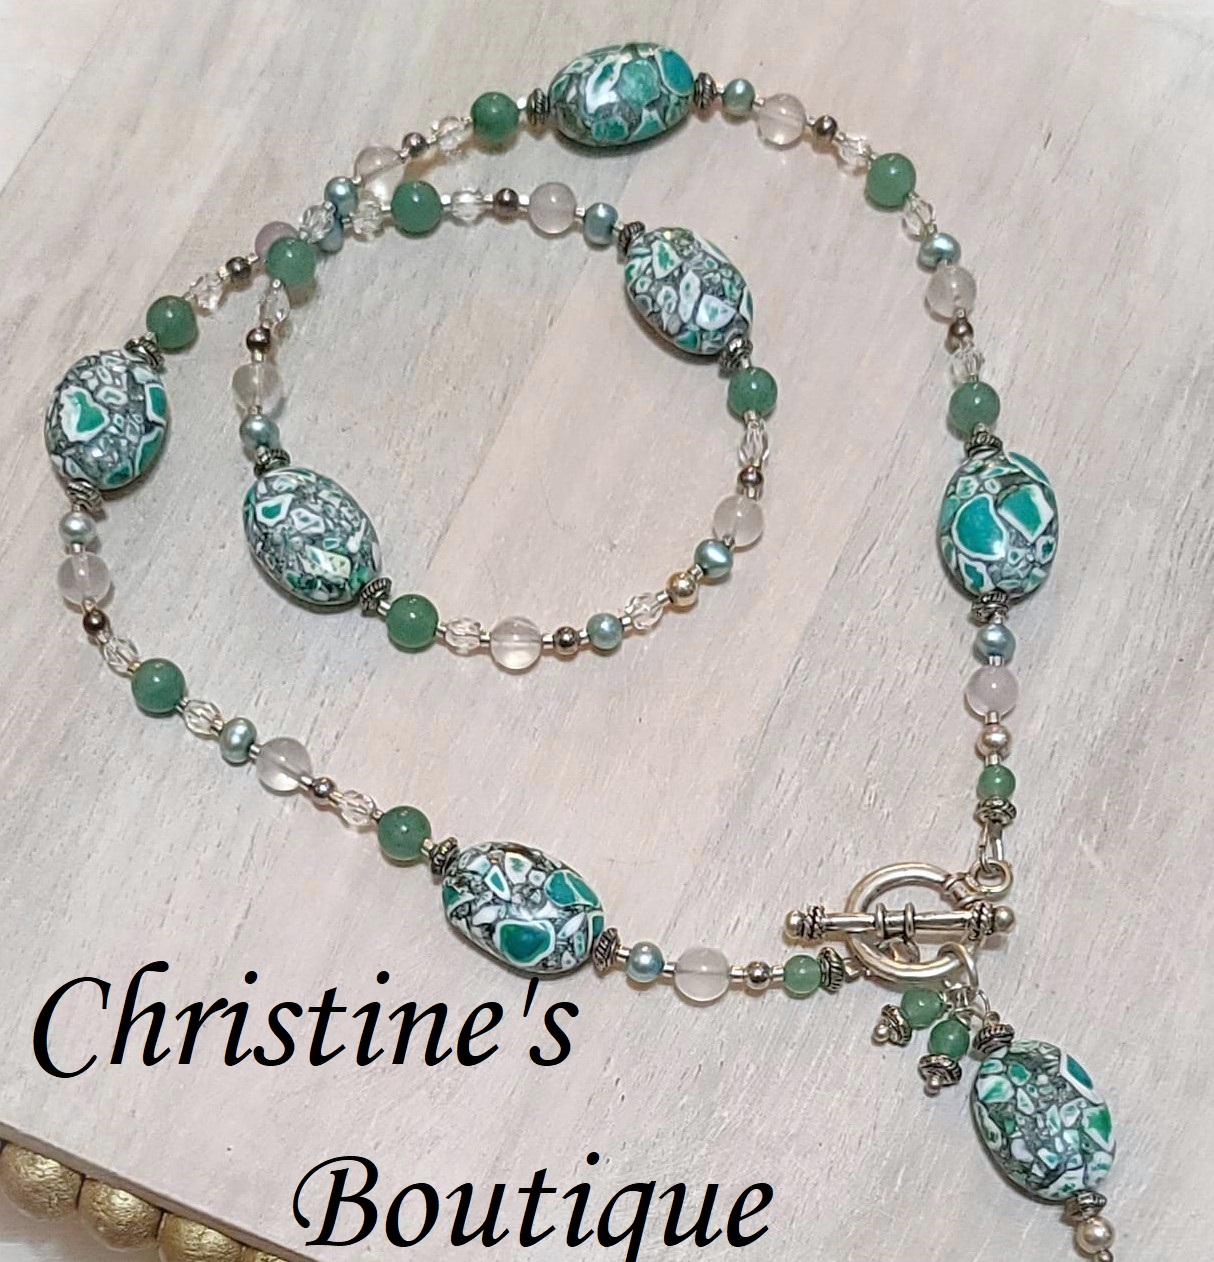 Jade gemstone lariat necklace, with pearls and crystals